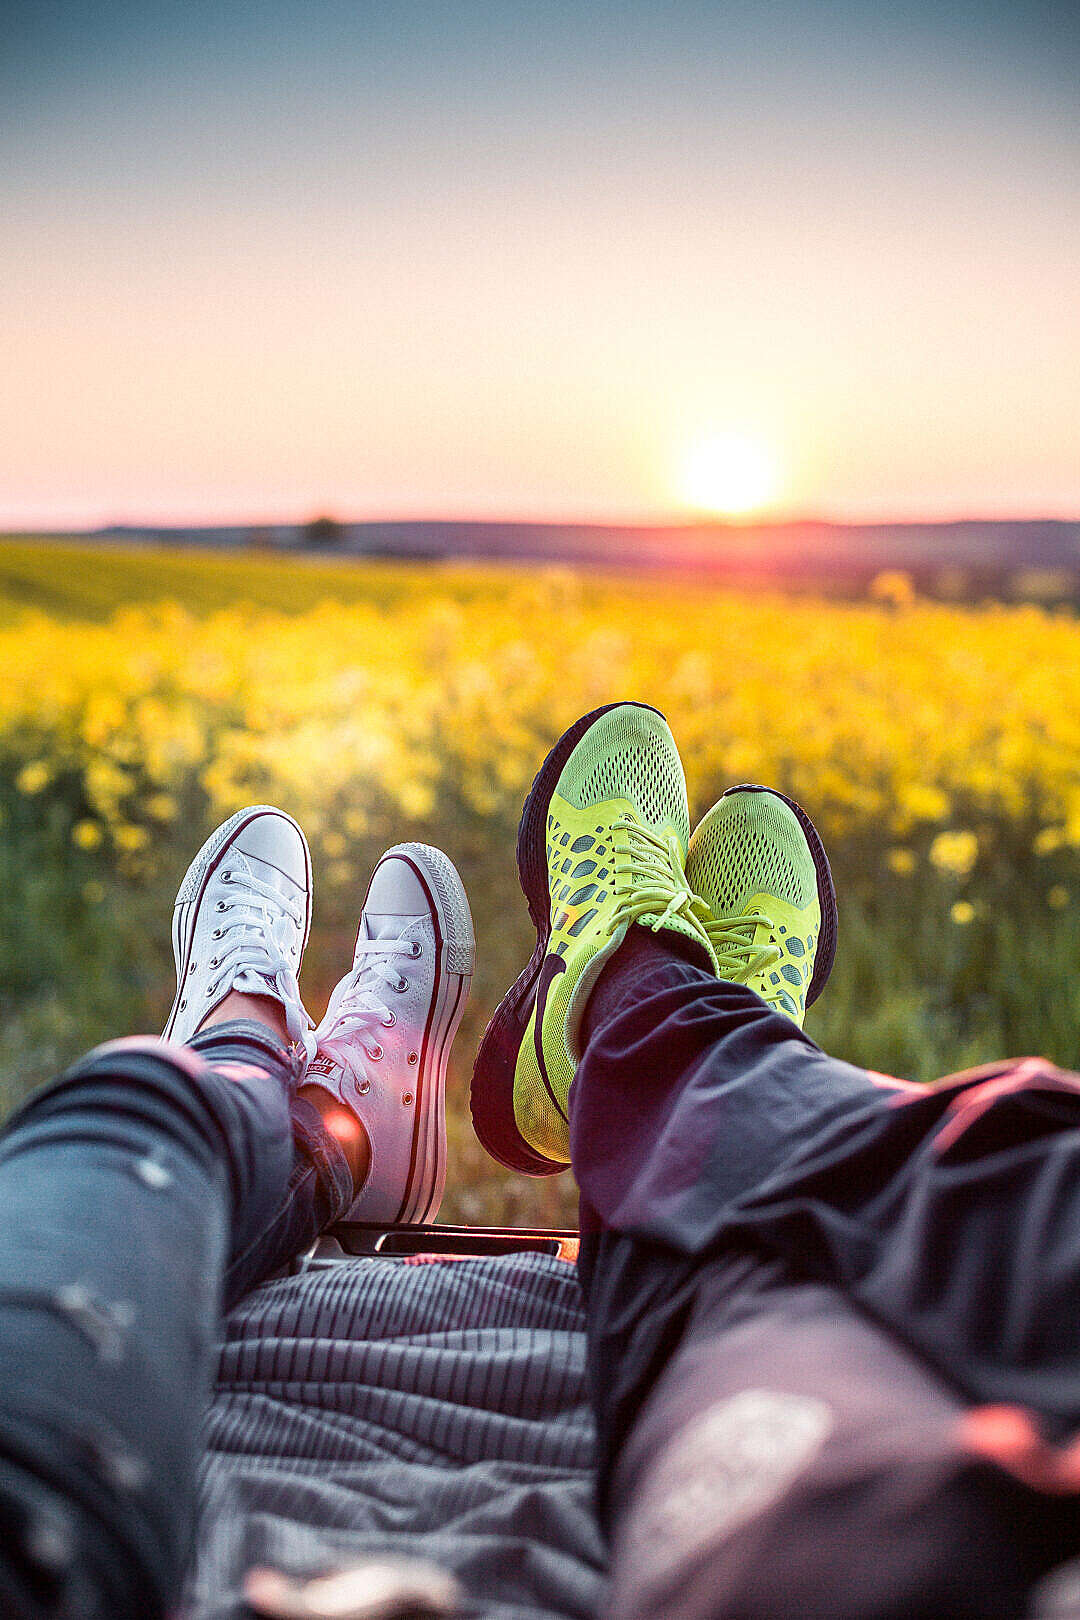 Download Young Couple Enjoying Sunset in a Car Trunk FREE Stock Photo